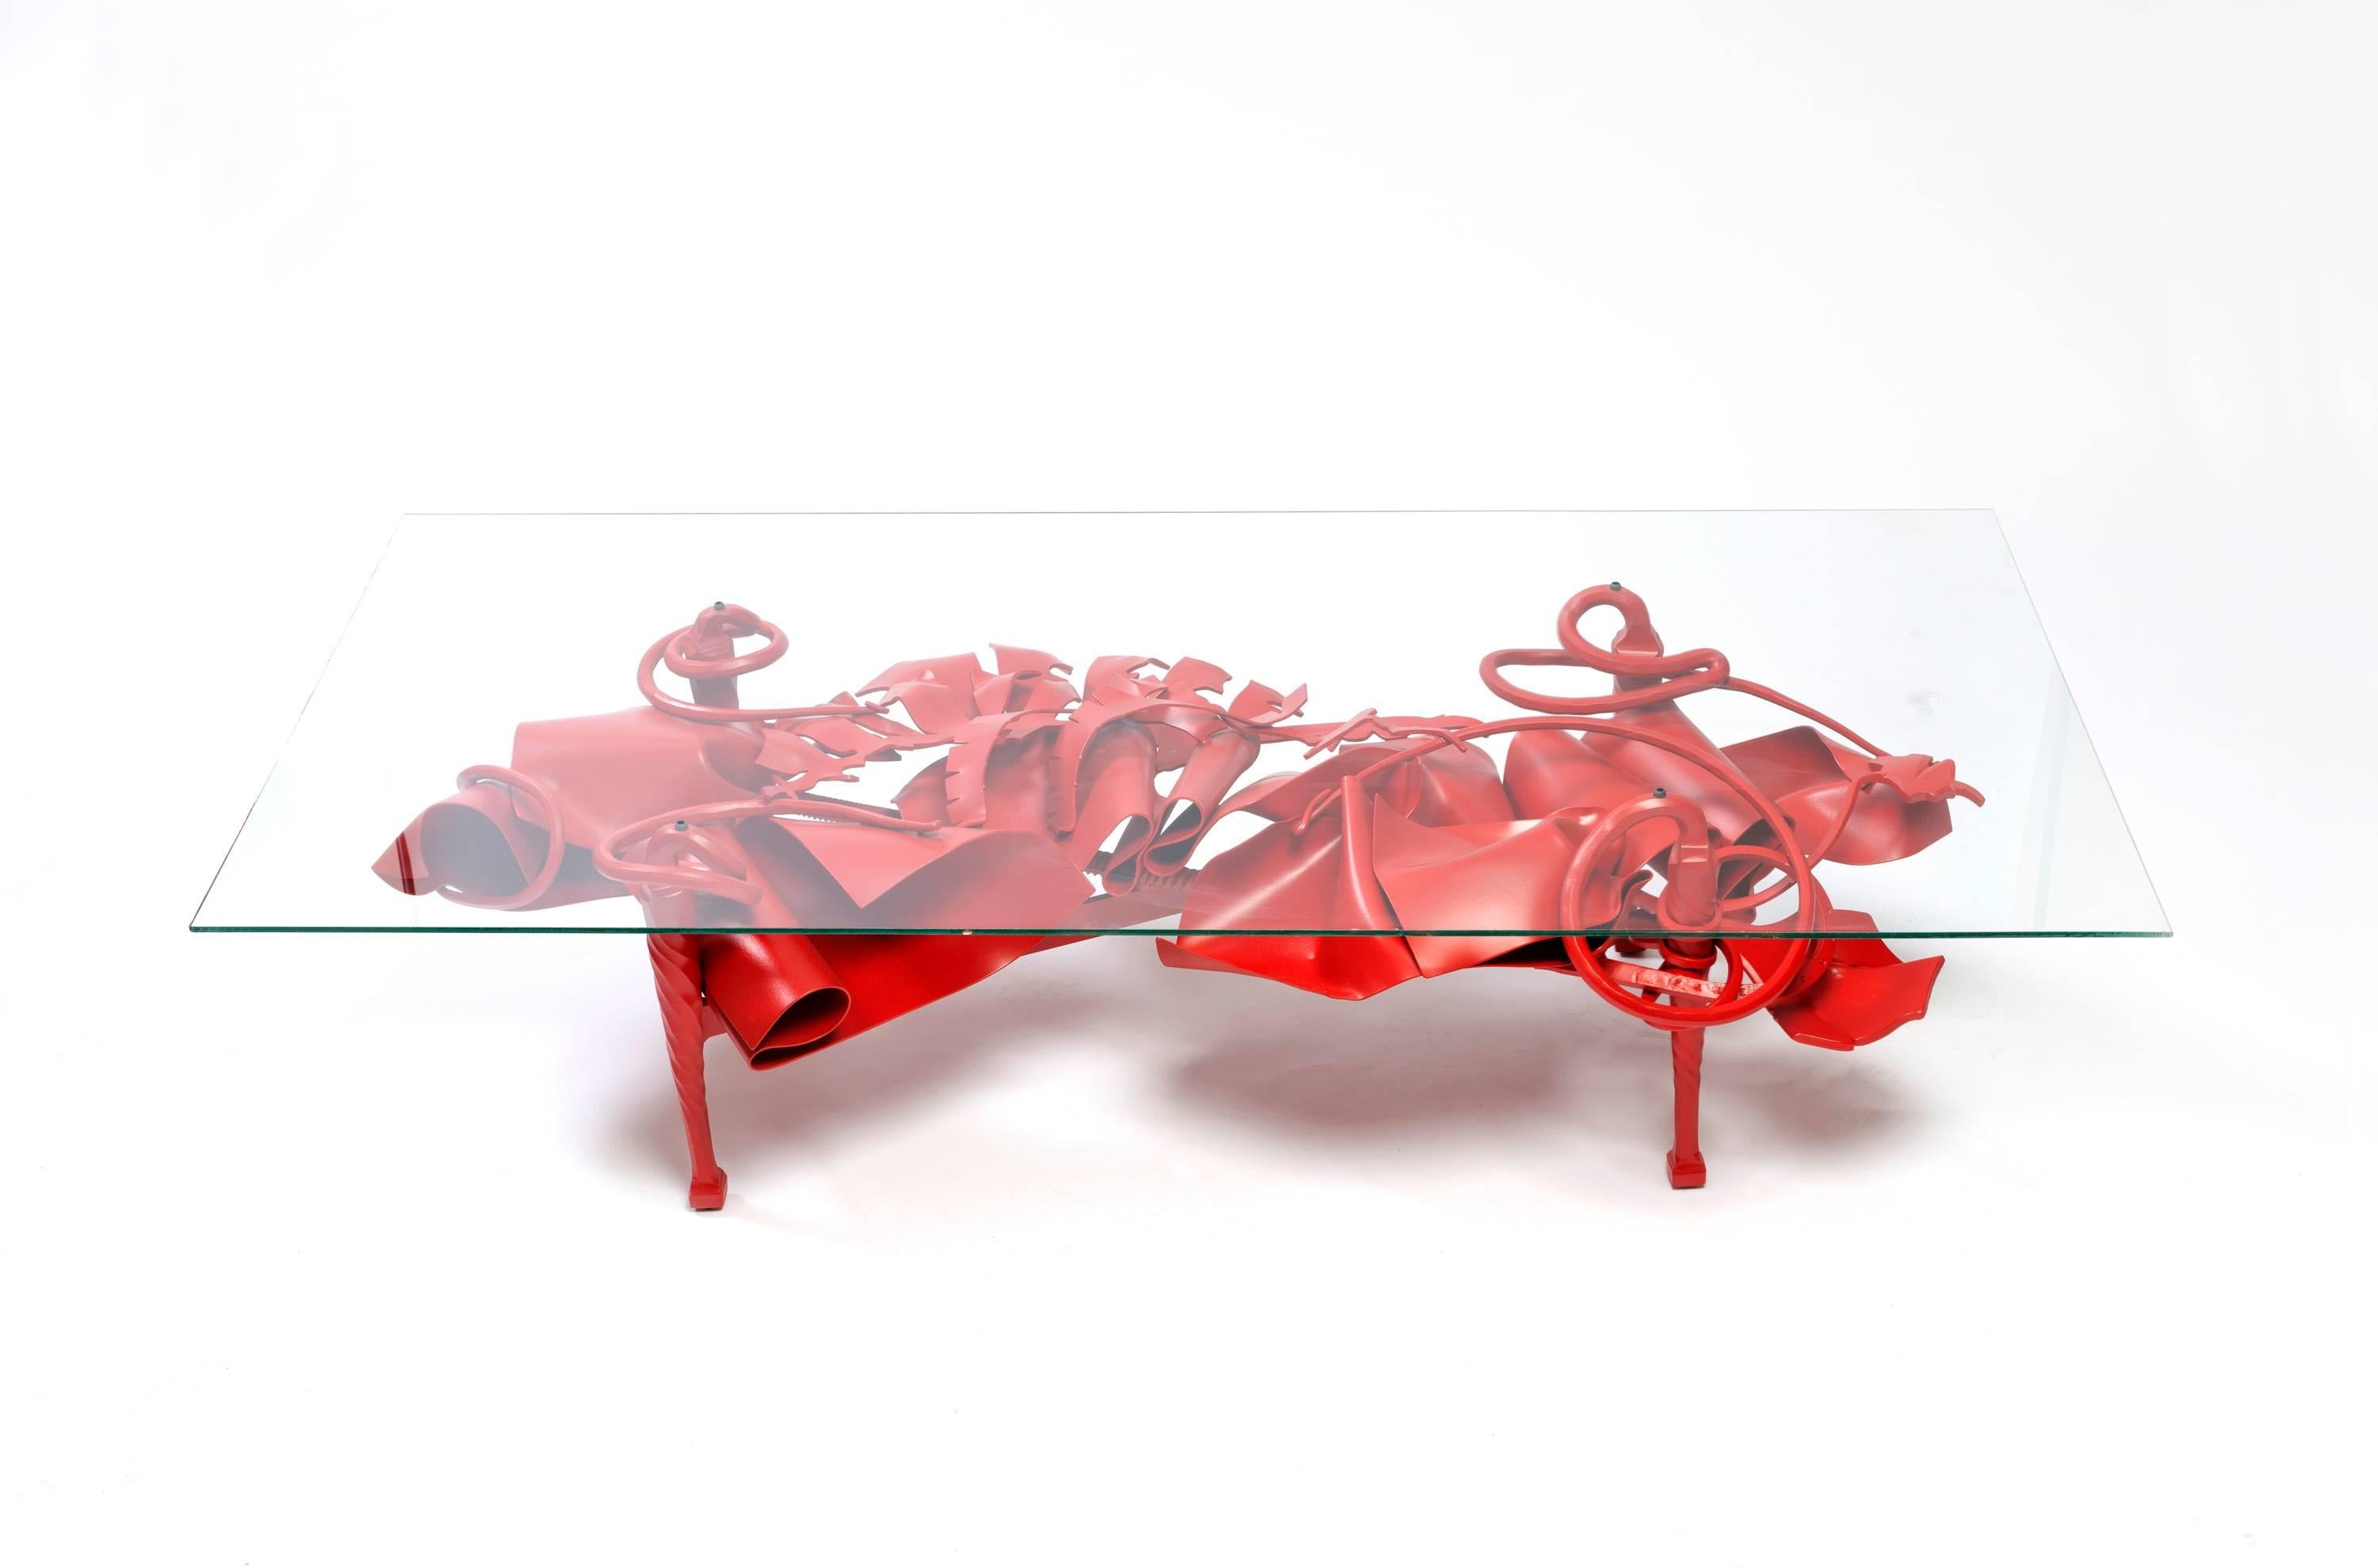 The unique coffee table design by world renowned sculptor and metalworker Albert Paley is the first piece from his new body of work, Convergence: Color and Form. High-lead glass top is available separately.

Albert Paley (born 1944) is an American